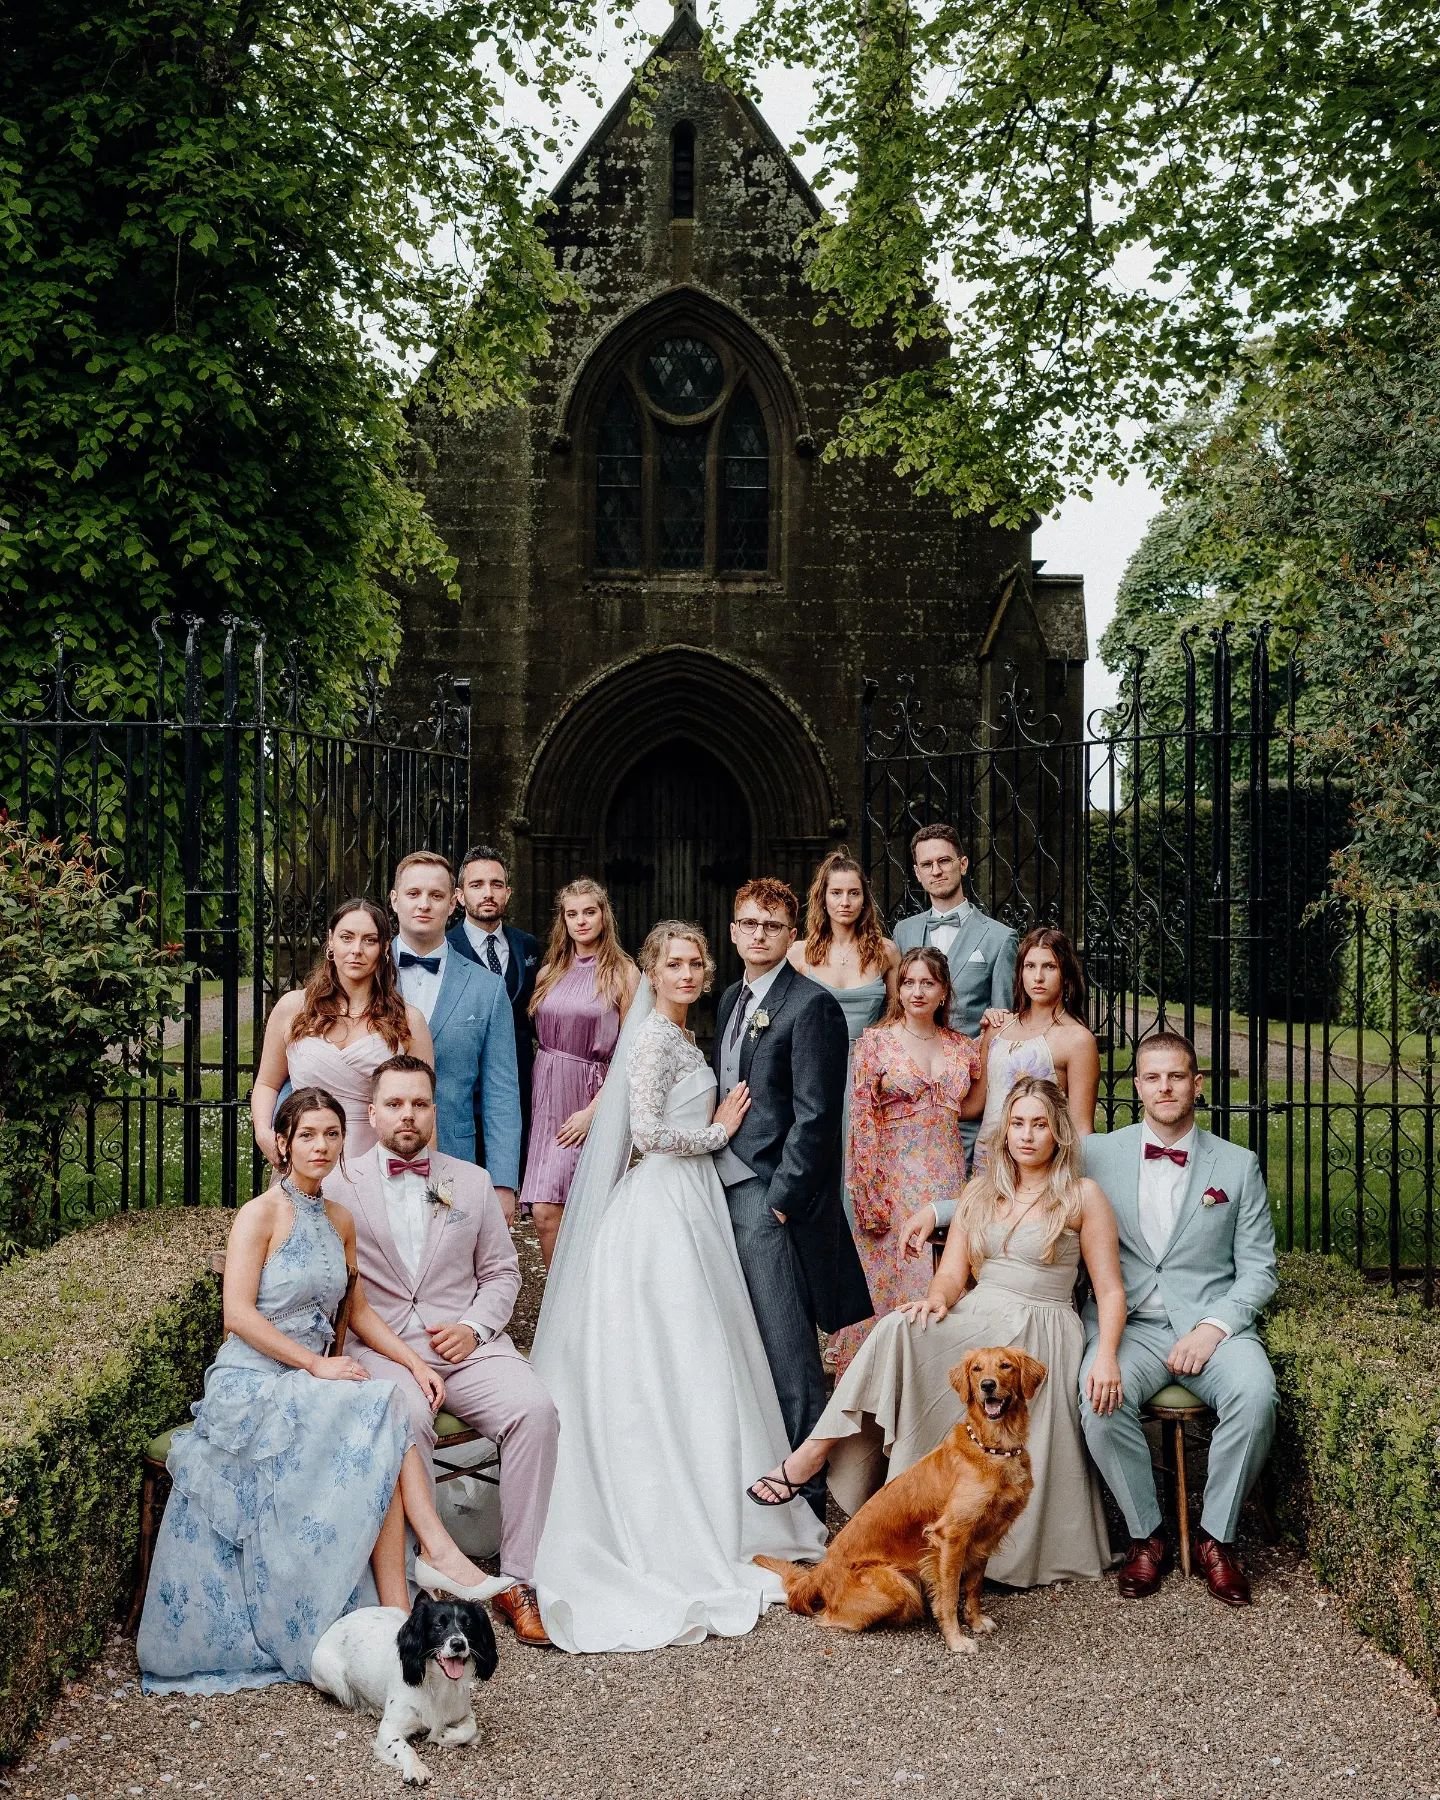 A true privilege to celebrate the wedding of @_vanessasiel and @lukaspfanger last week as they made the trip from Germany with 30 of their closest people to celebrate in one of the most perfect venues in Scotland, Rosebery House (@roseberyvenues). Wo